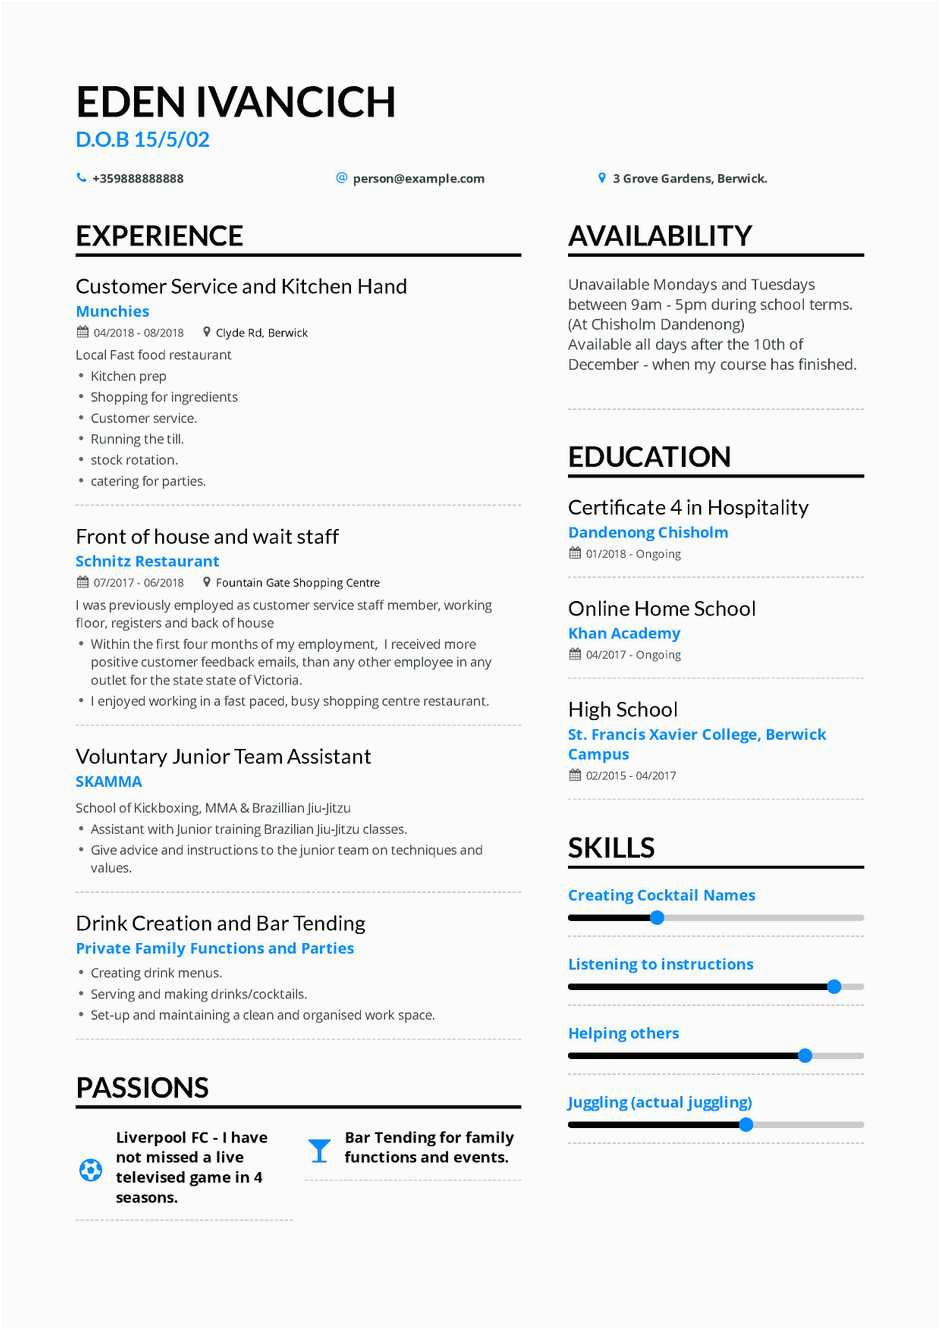 Sample Resume for Teenager who Has Never Worked the Best 2019 Fresher Resume formats and Samples